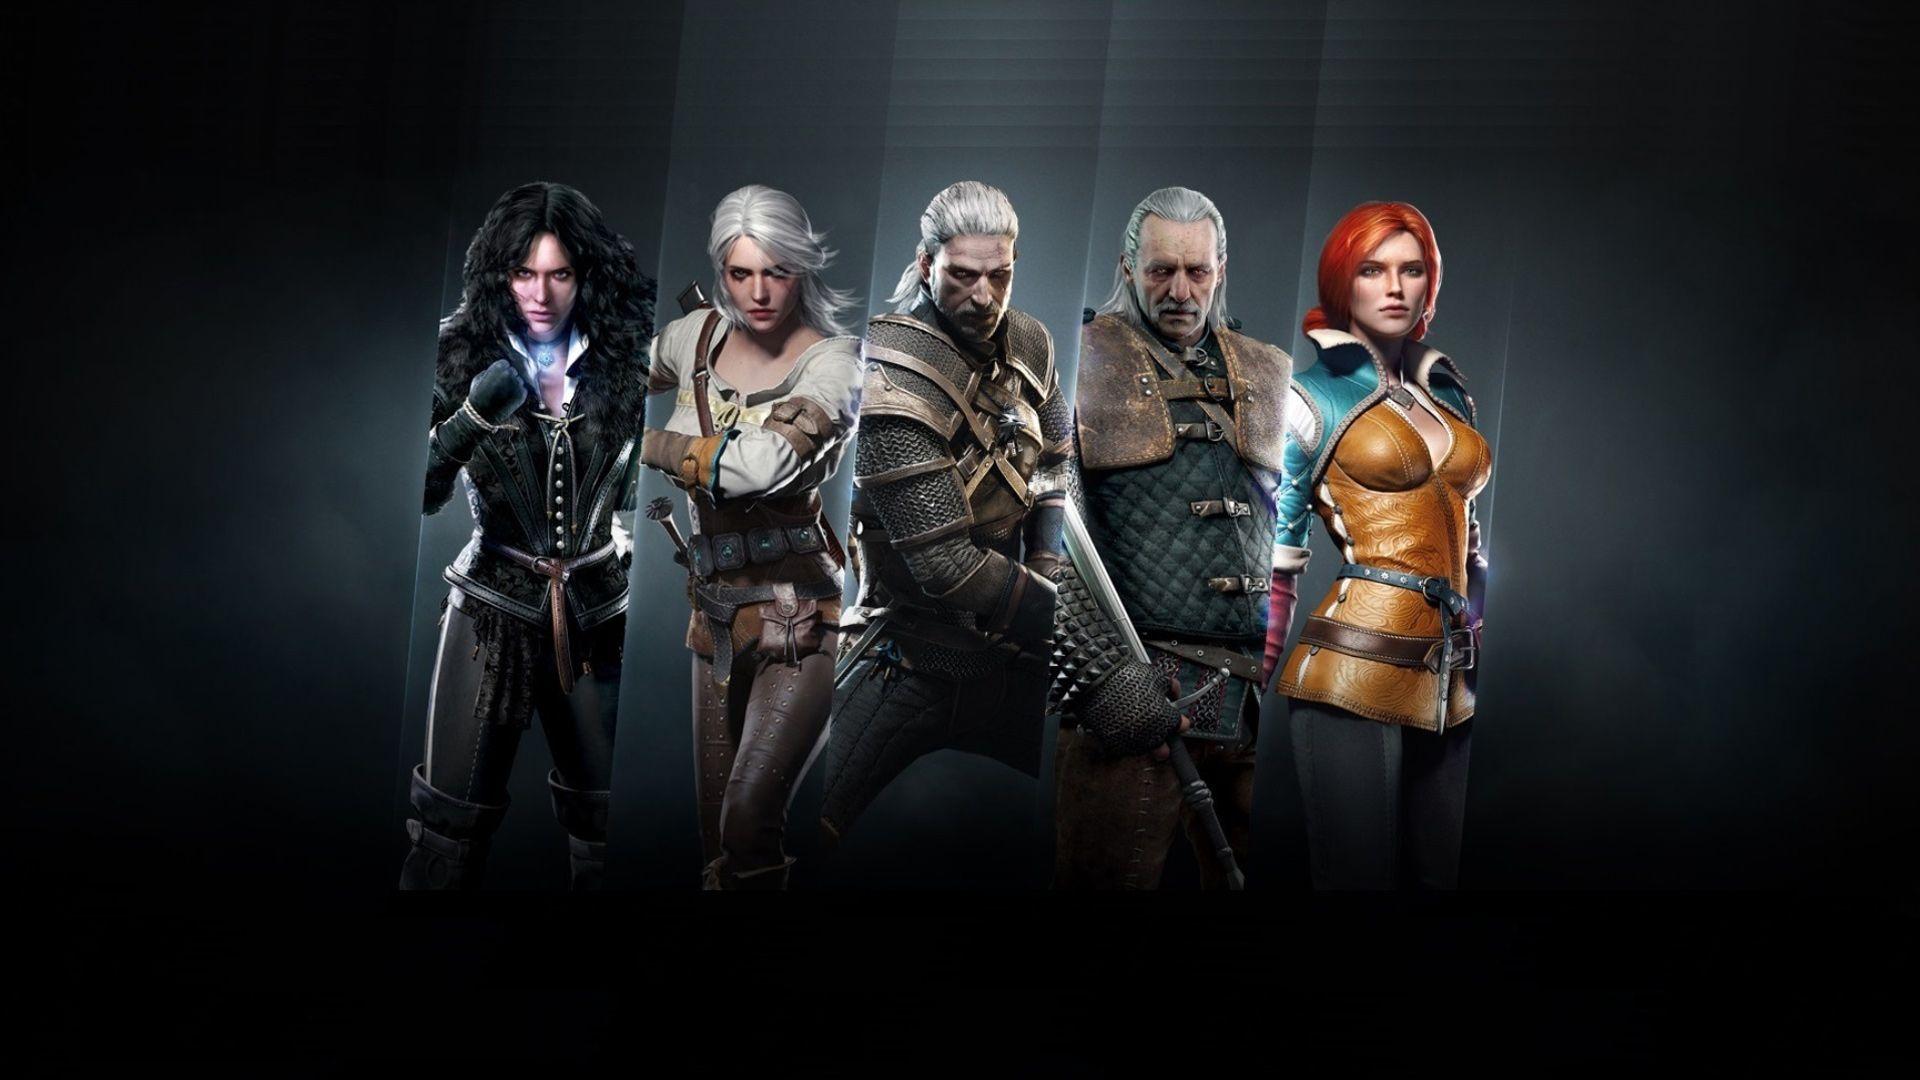 Download Witcher 3 HD Wallpaper